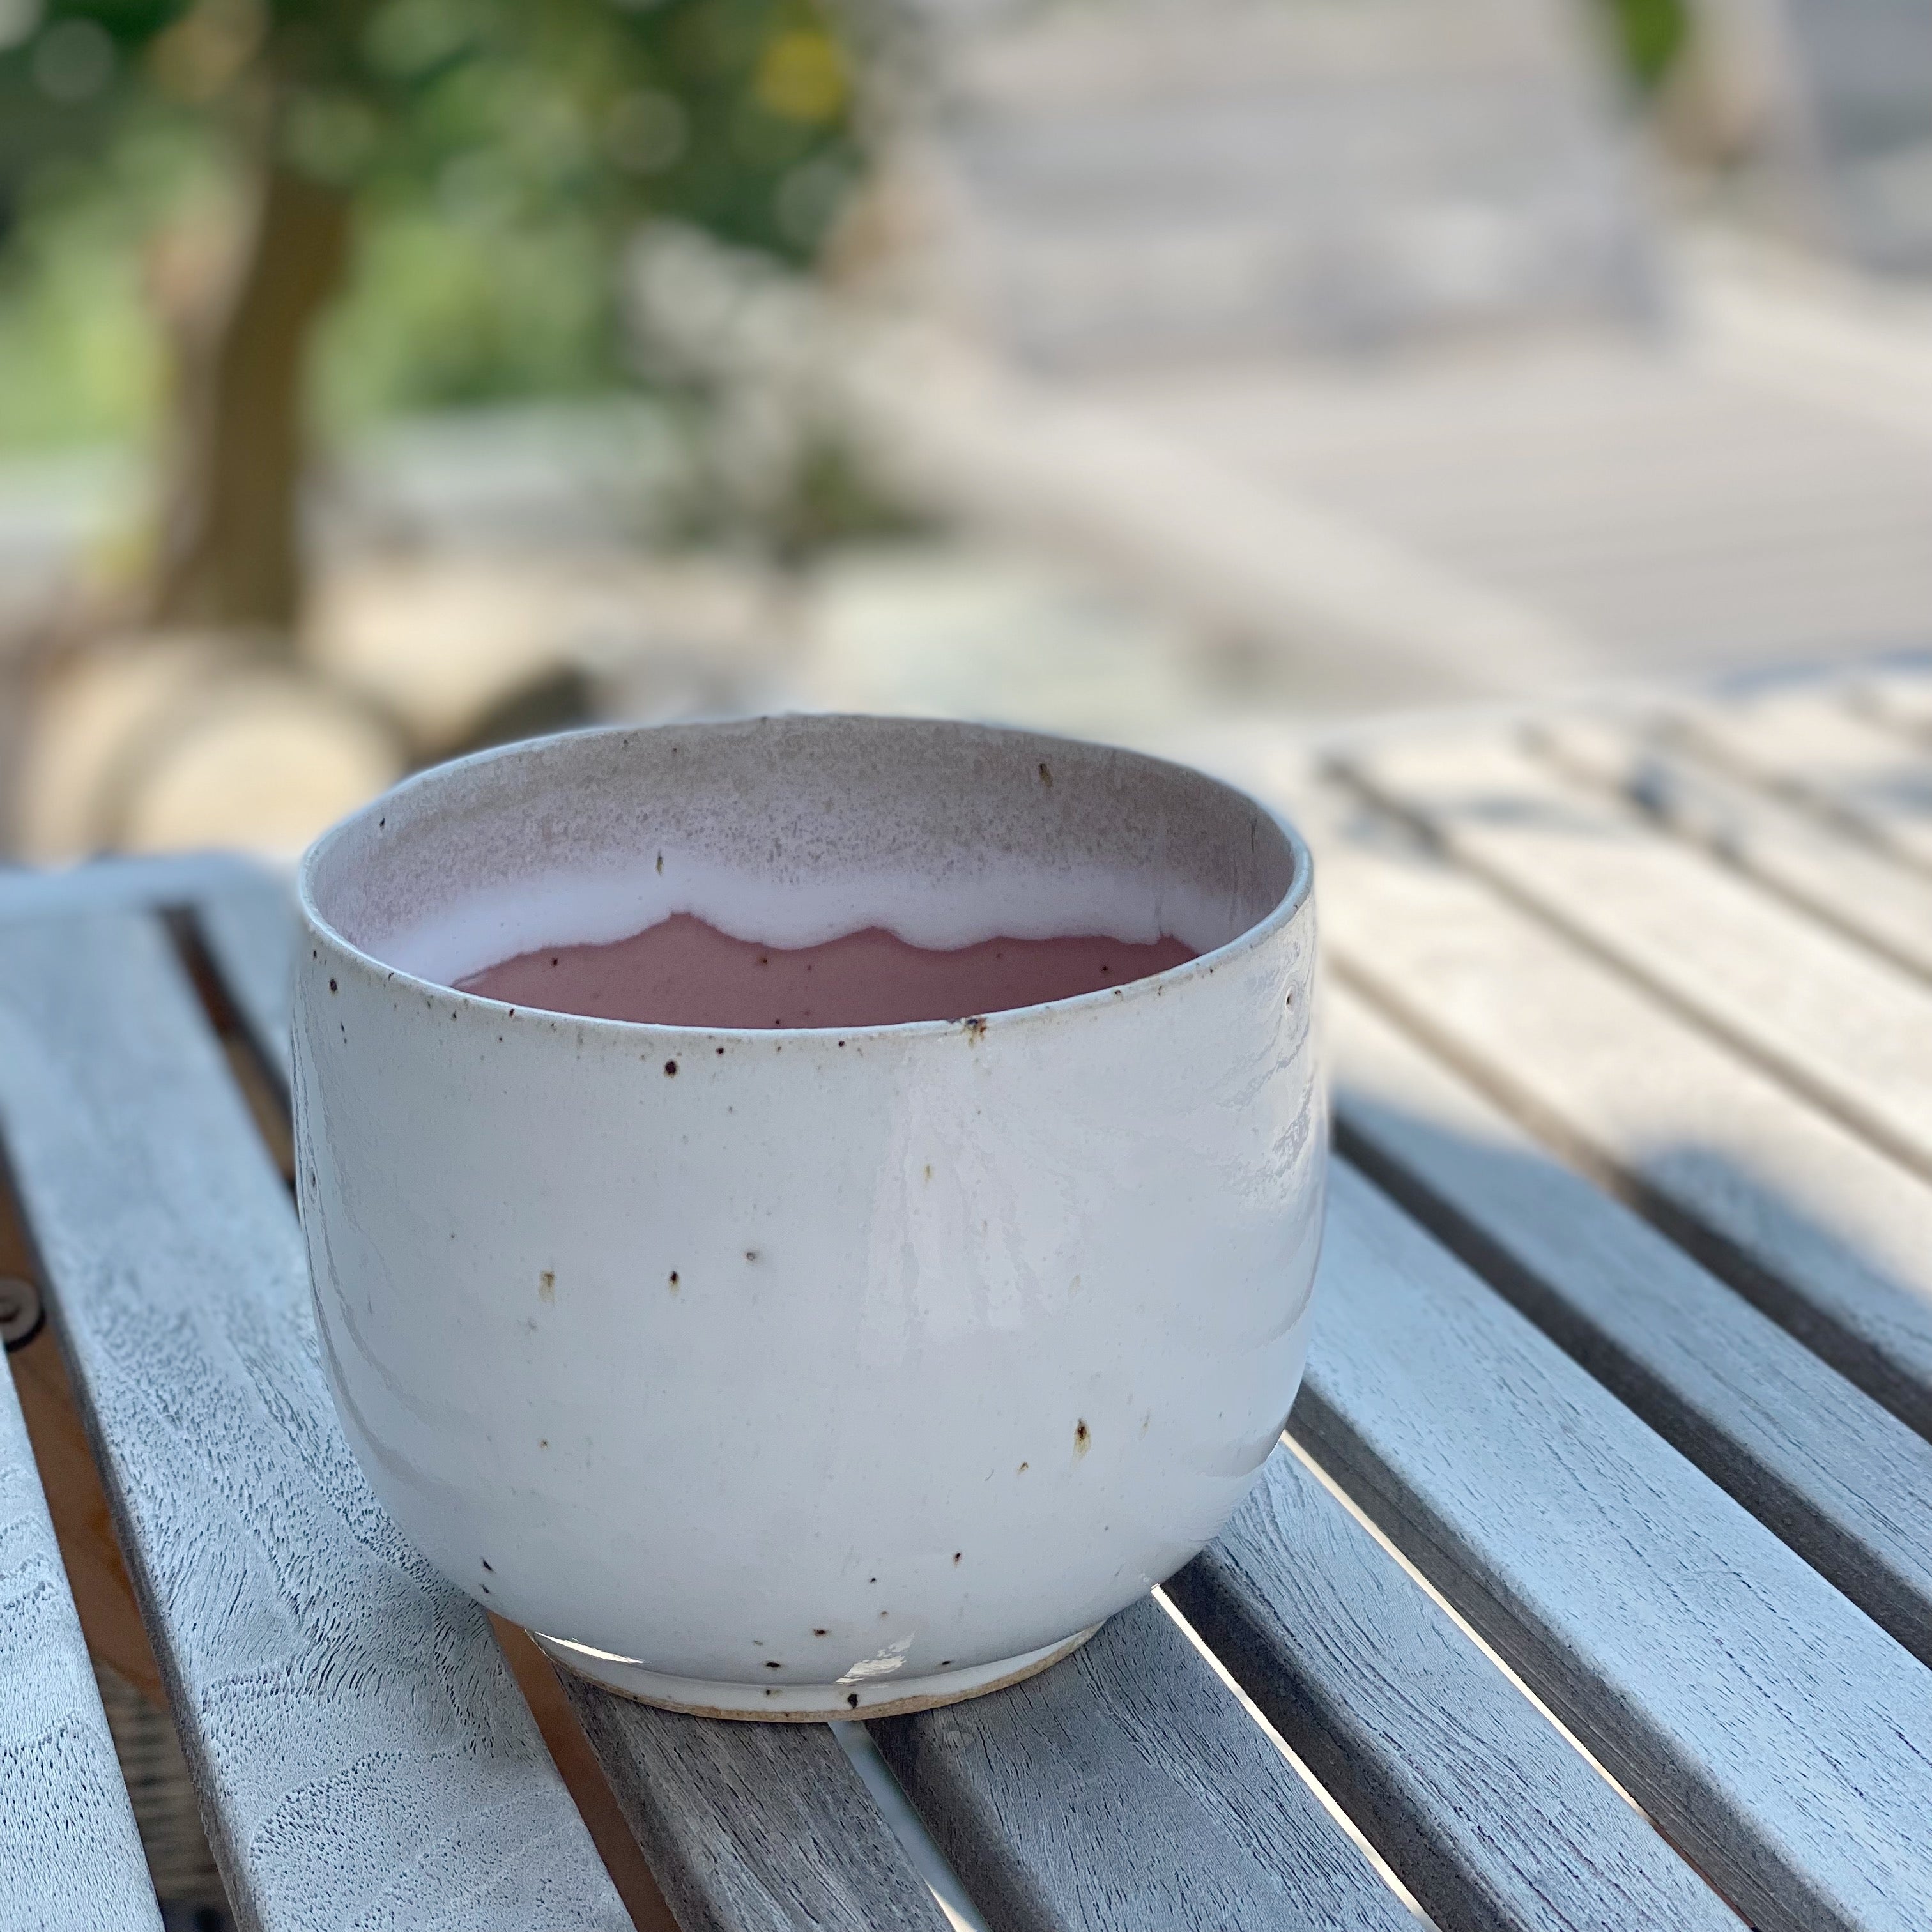 Tasja P tea cup Mirabelle - off white and pink